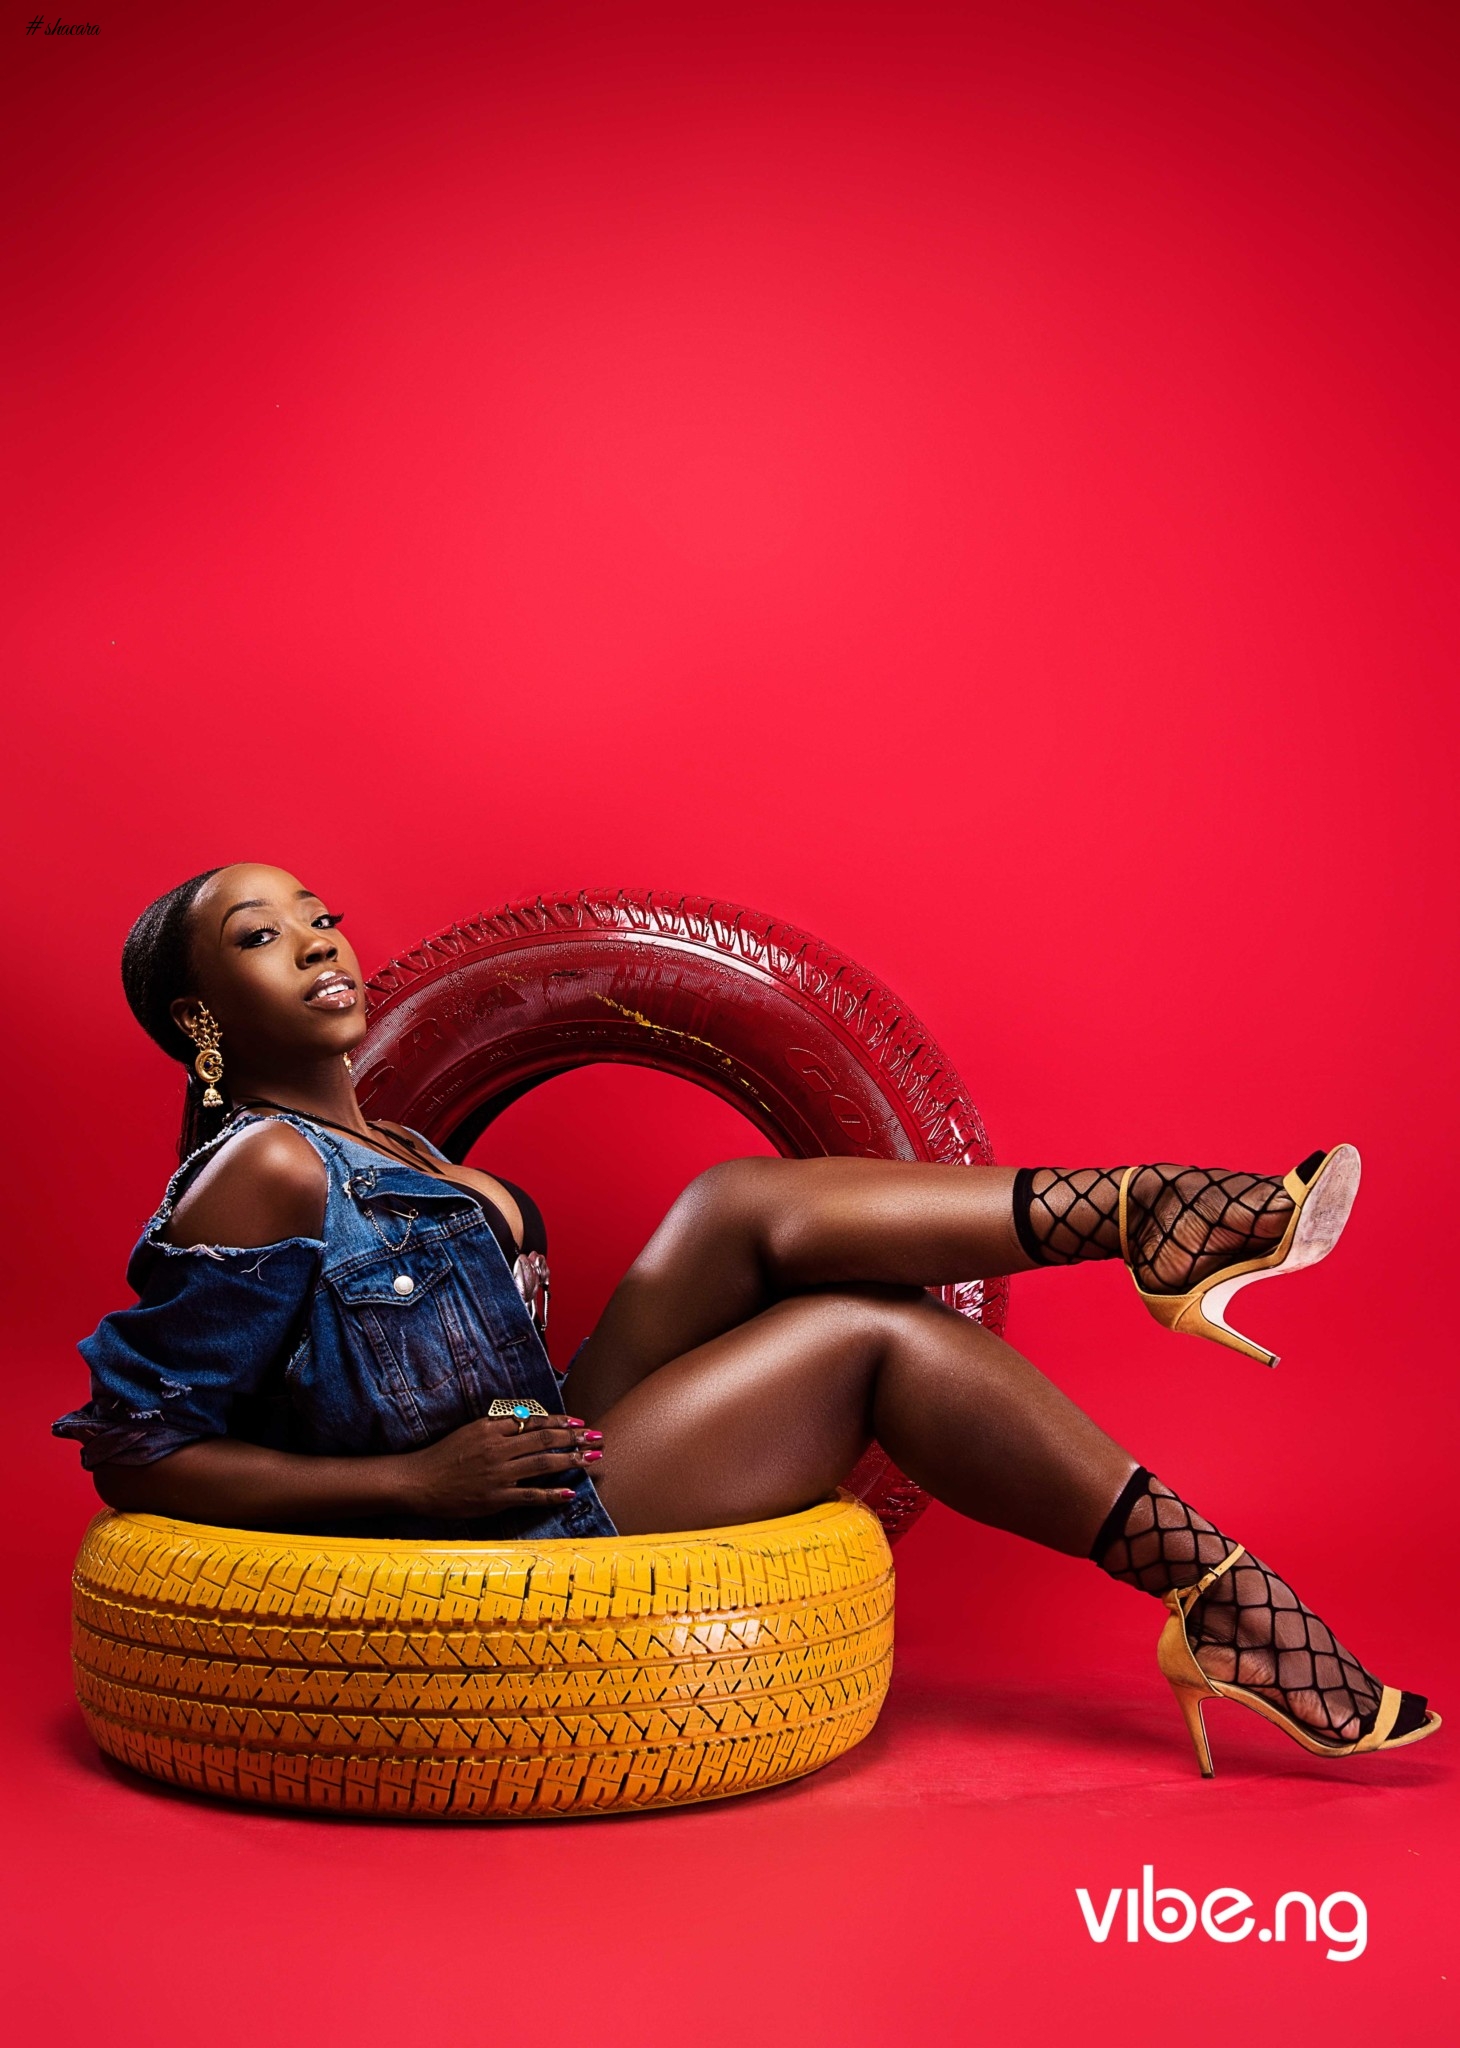 Saucing! Beverly Naya Is Hot On The Cover Of Vibe.Ng Magazine